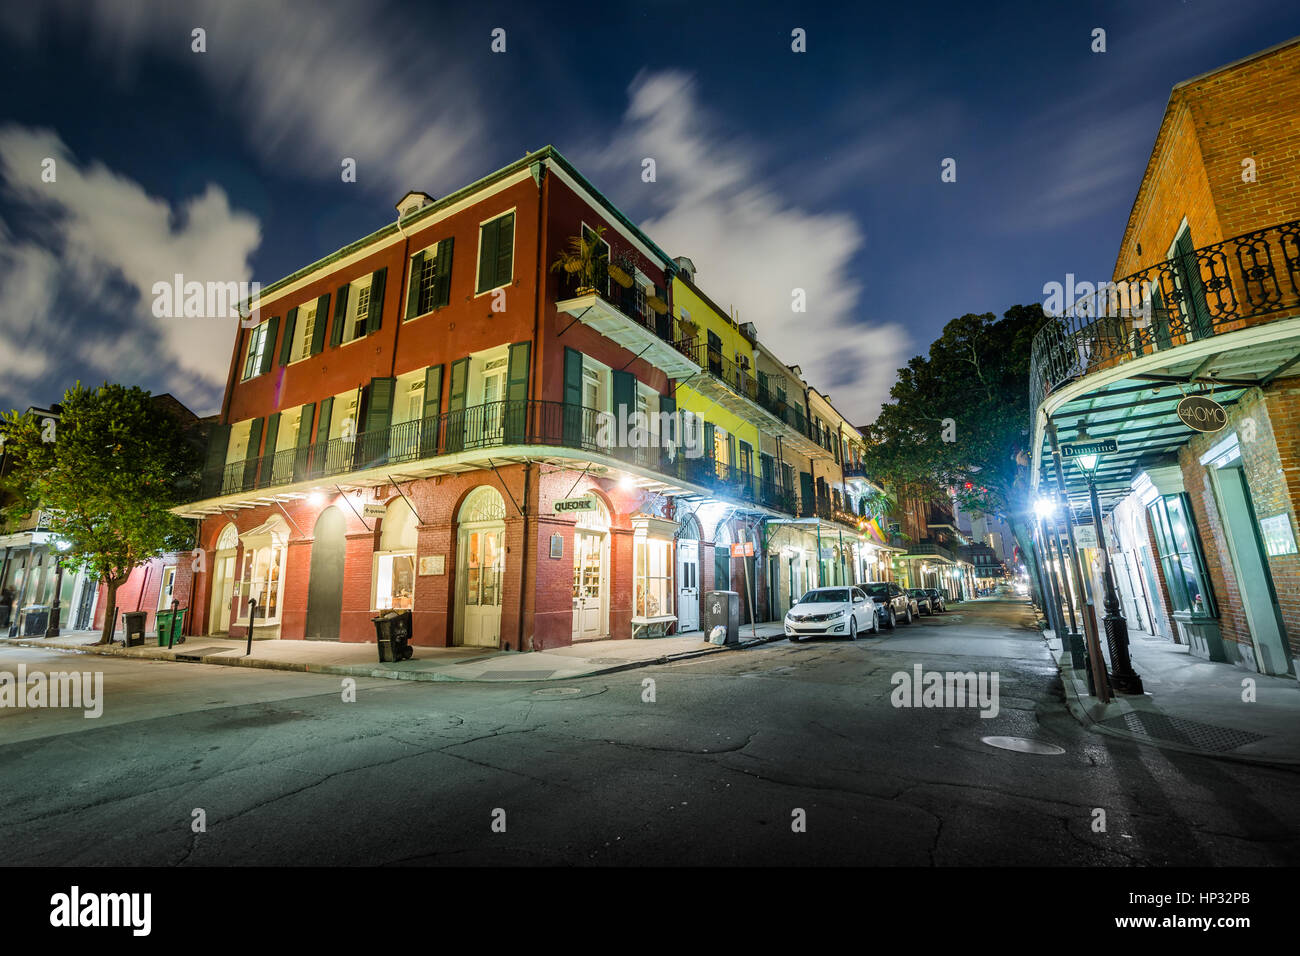 Buildings in the French Quarter at night, in New Orleans, Louisiana. Stock Photo